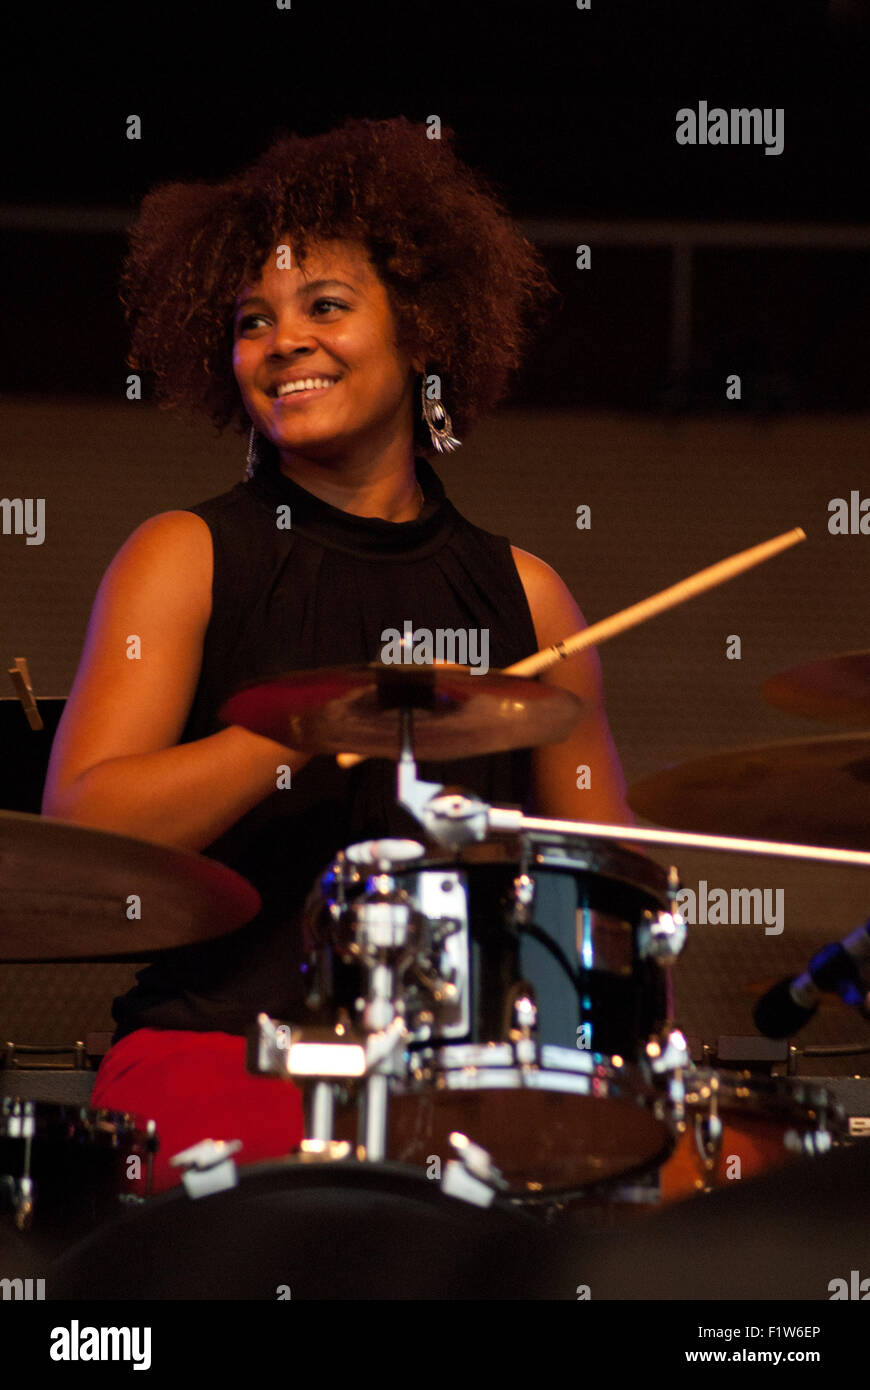 Chicago, Illinnois, USA. 6th Sep, 2015. Sunday, September 7, 2015, was the fourth and final day of the Chicago Jazz Festival. Music permeated Millennium Park in the heart of Chicago from noon until well into the night. At the Pritzker Pavillion, the evening performances featured Jane Burnett & Maqueque, all all female sextet, French singer Cyrille Aimée and the reunion of the Muhal Richard Abrams' Experimental Band. Pictured: Yissy Garcia of Jane Bunnett & Maqueque © Karen I. Hirsch/ZUMA Wire/Alamy Live News Stock Photo